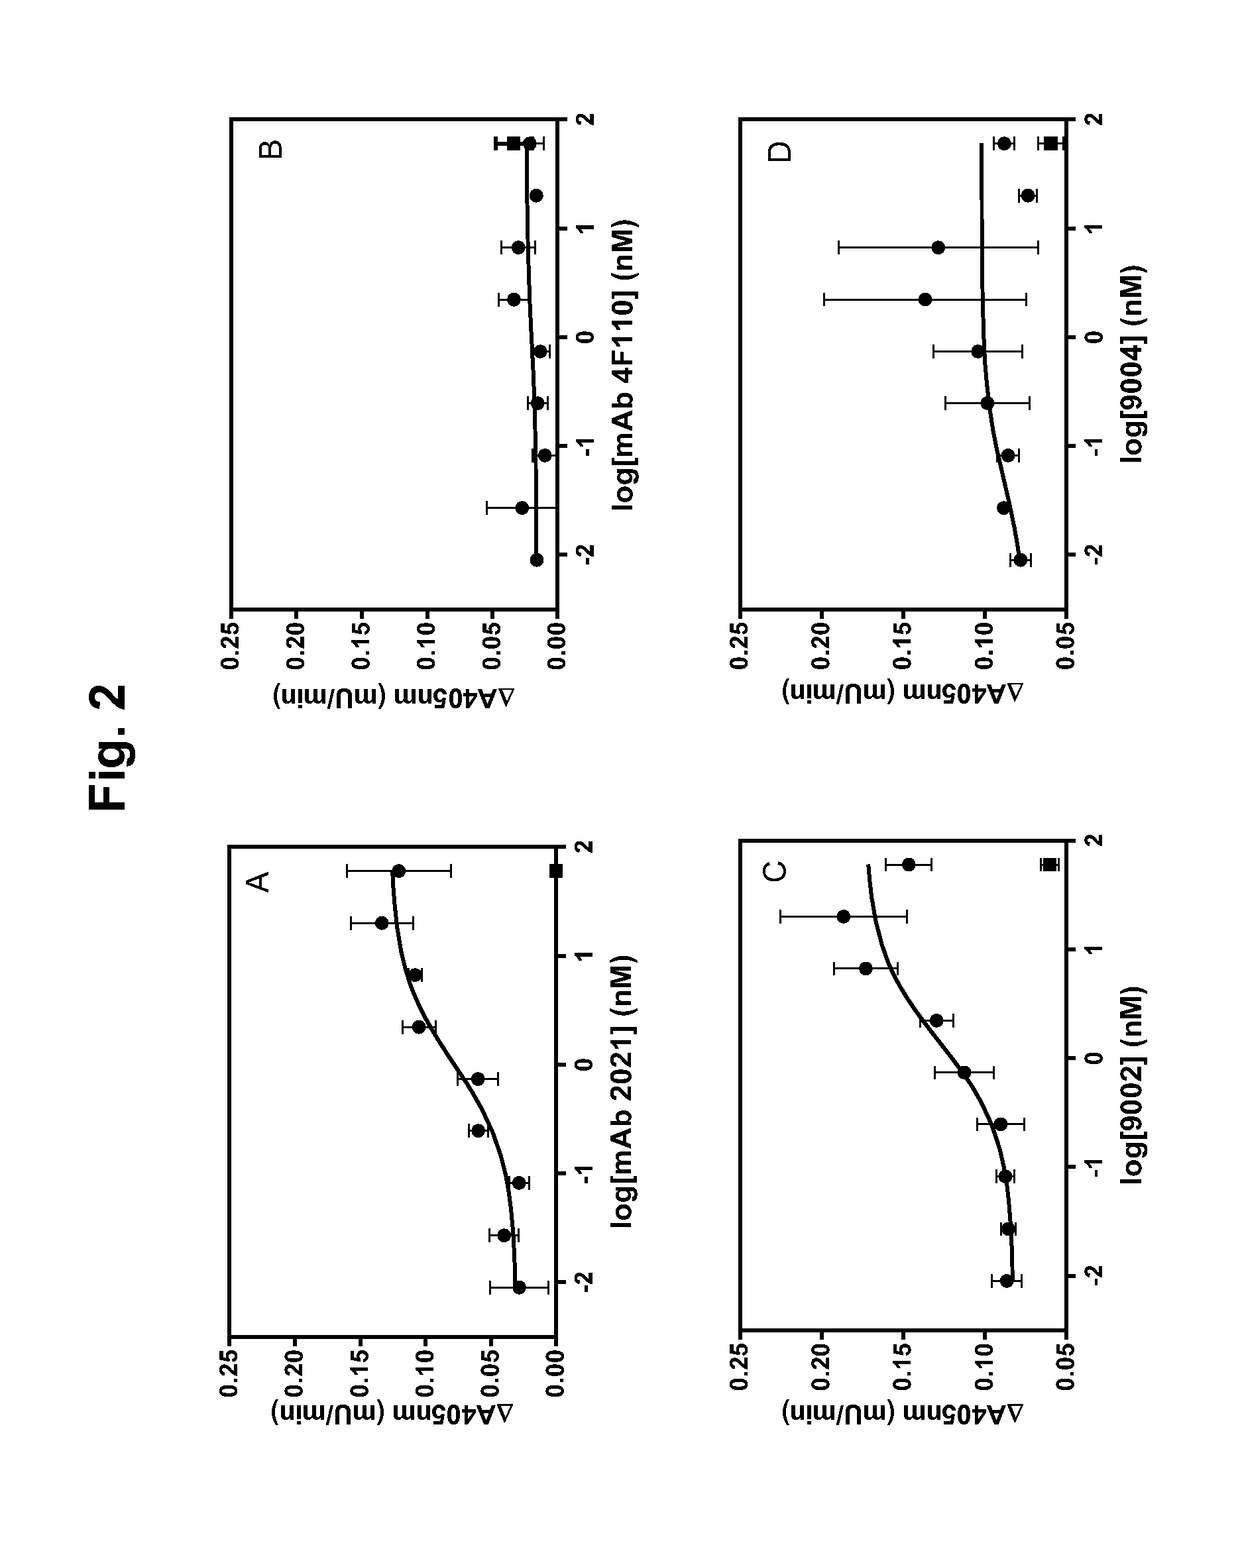 Antibodies capable of specifically binding two epitopes on tissue factor pathway inhibitor